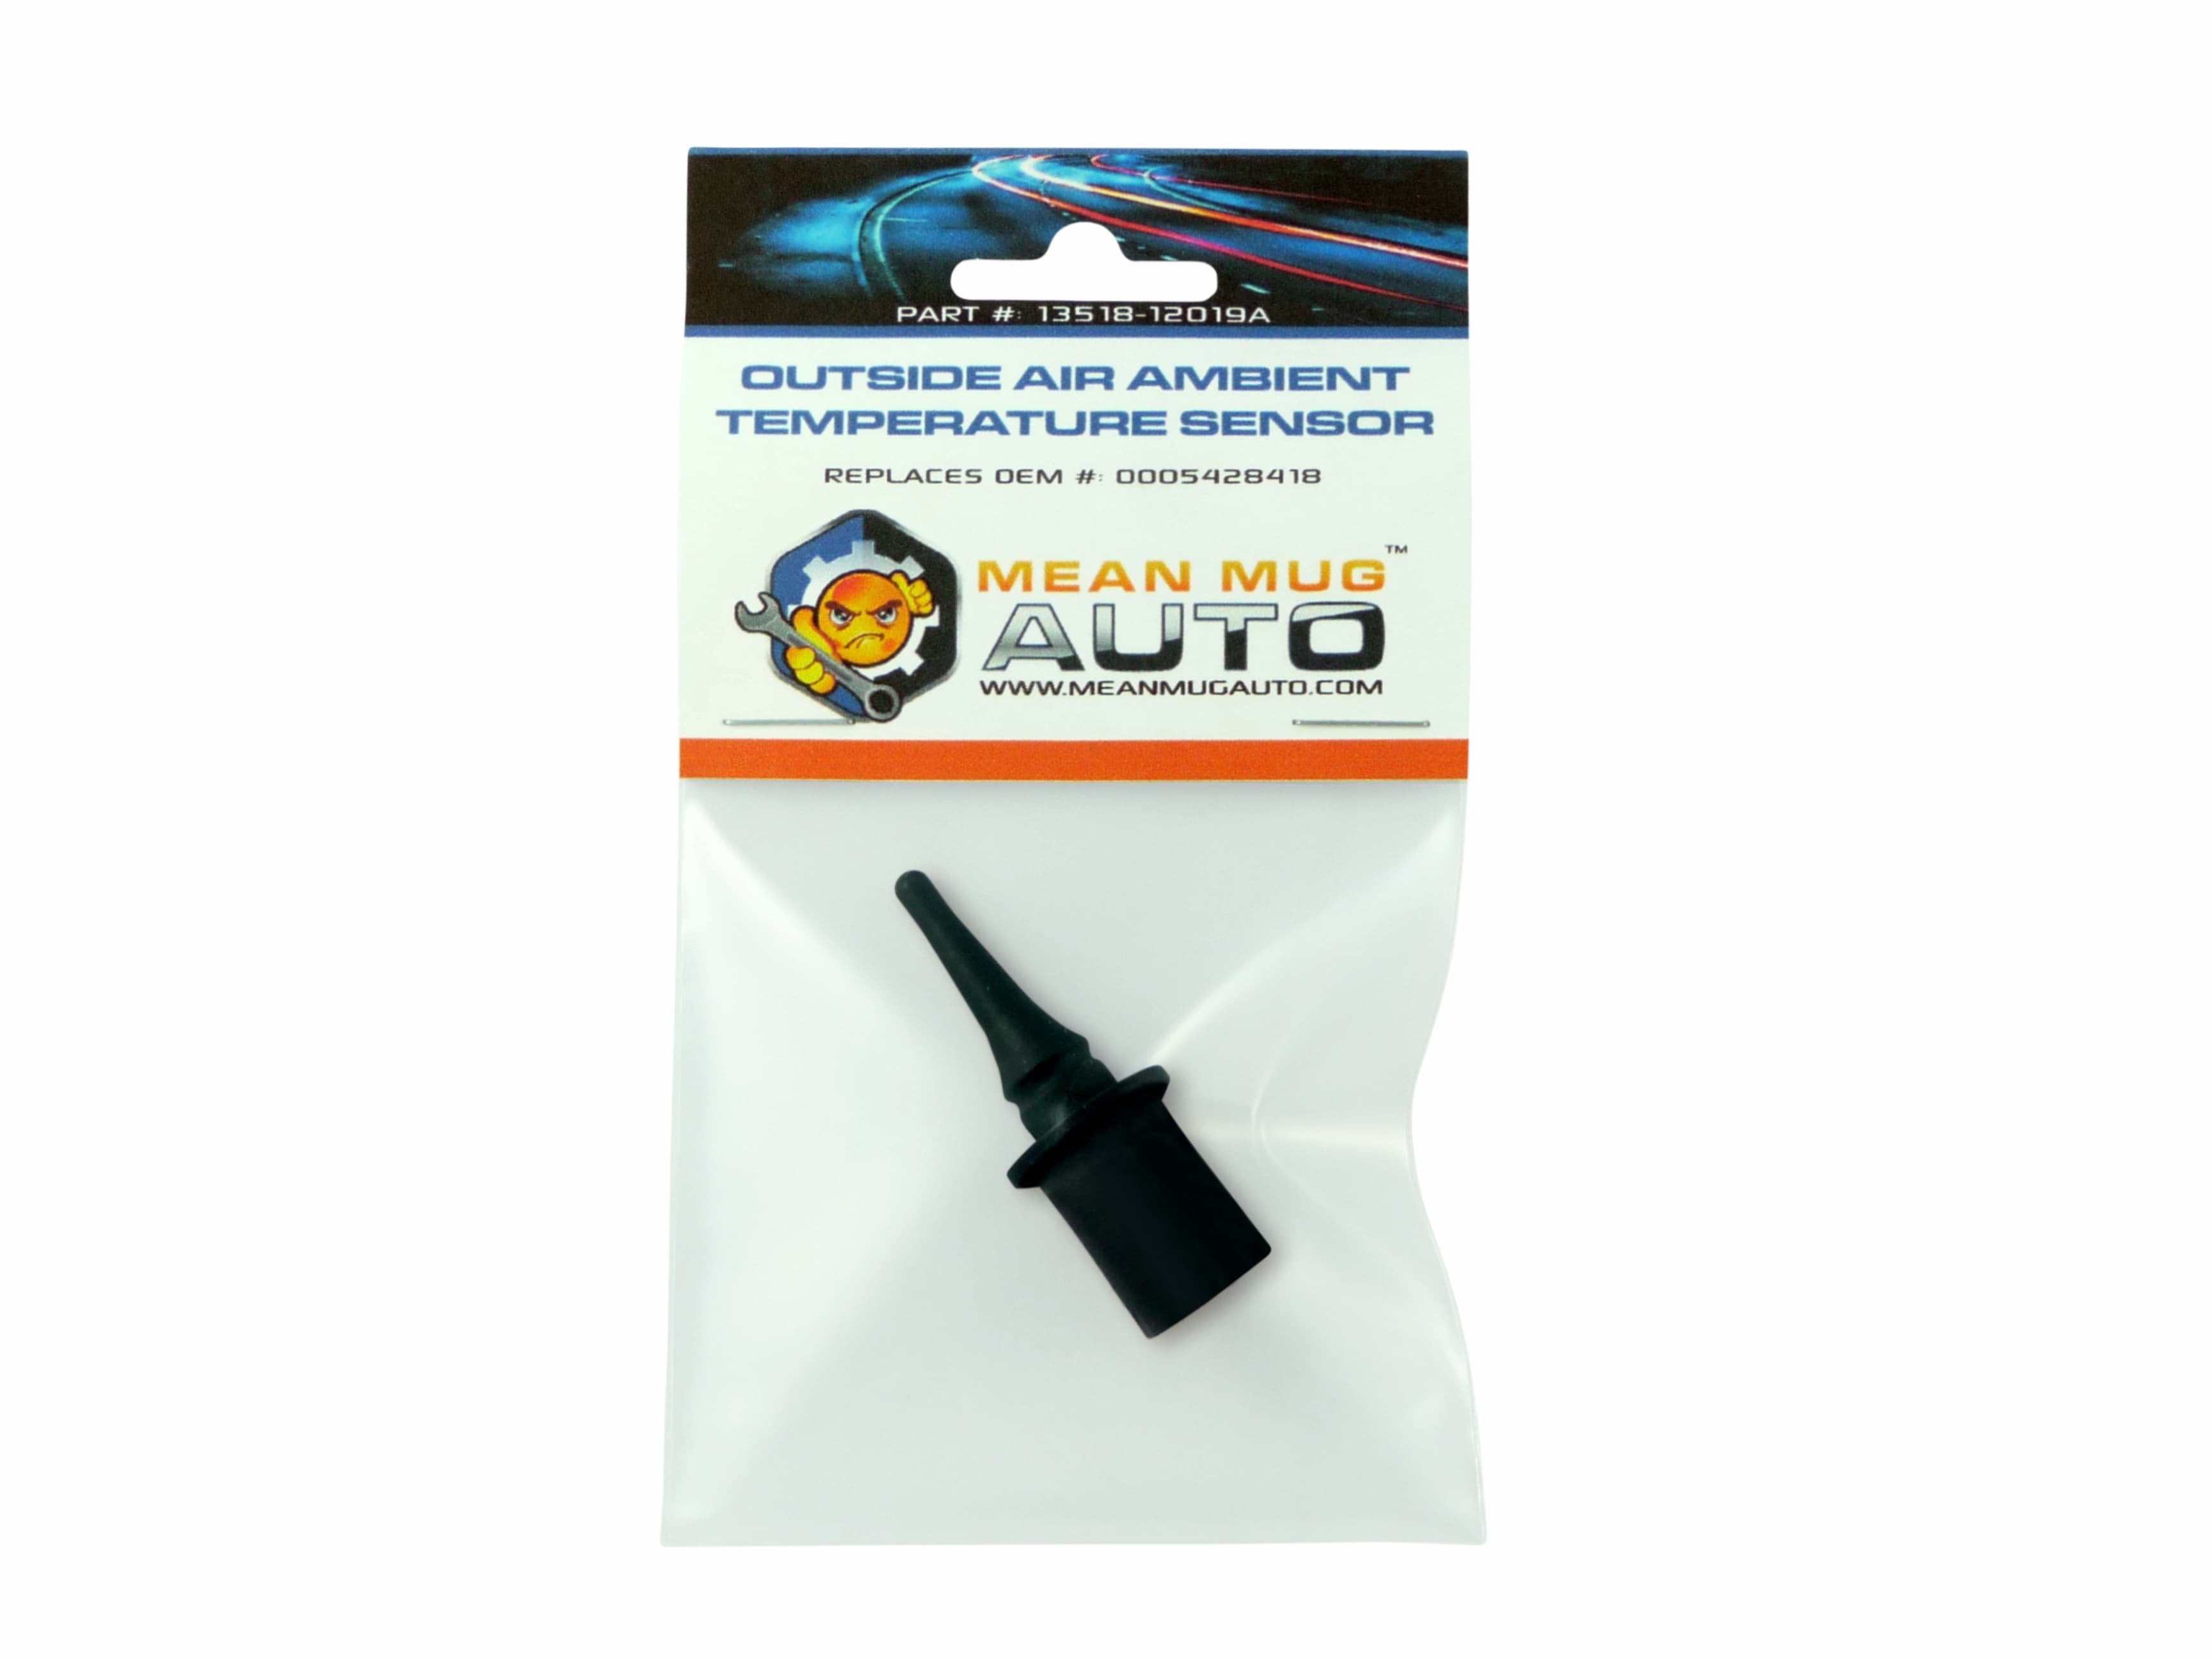 Mean Mug Auto 13518-12019A Outside Air Ambient Temperature Sensor Mercedes-Benz Replaces OEM # For 0005428418 